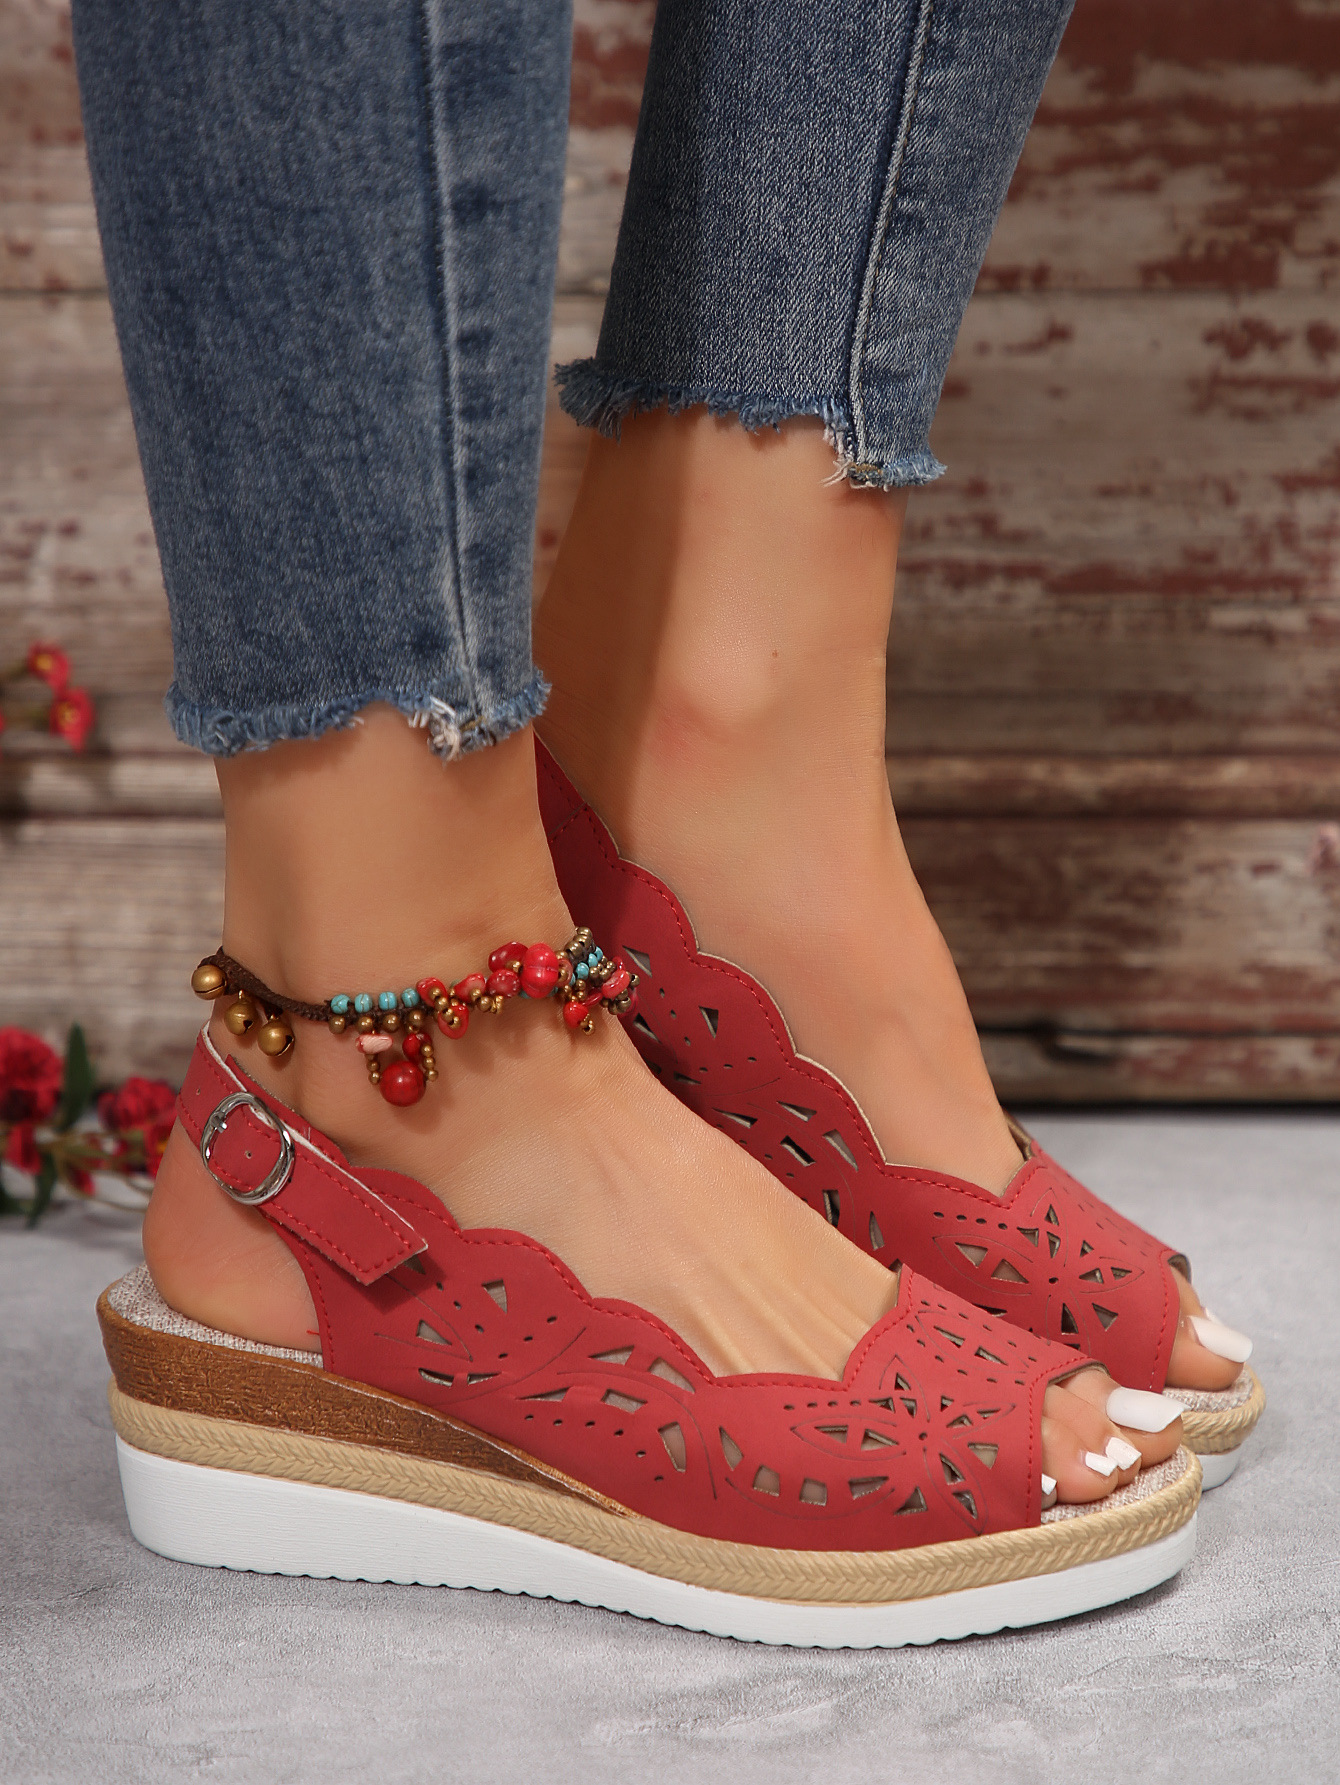 Women's Summer Fish-Mouth Wedge Sandals